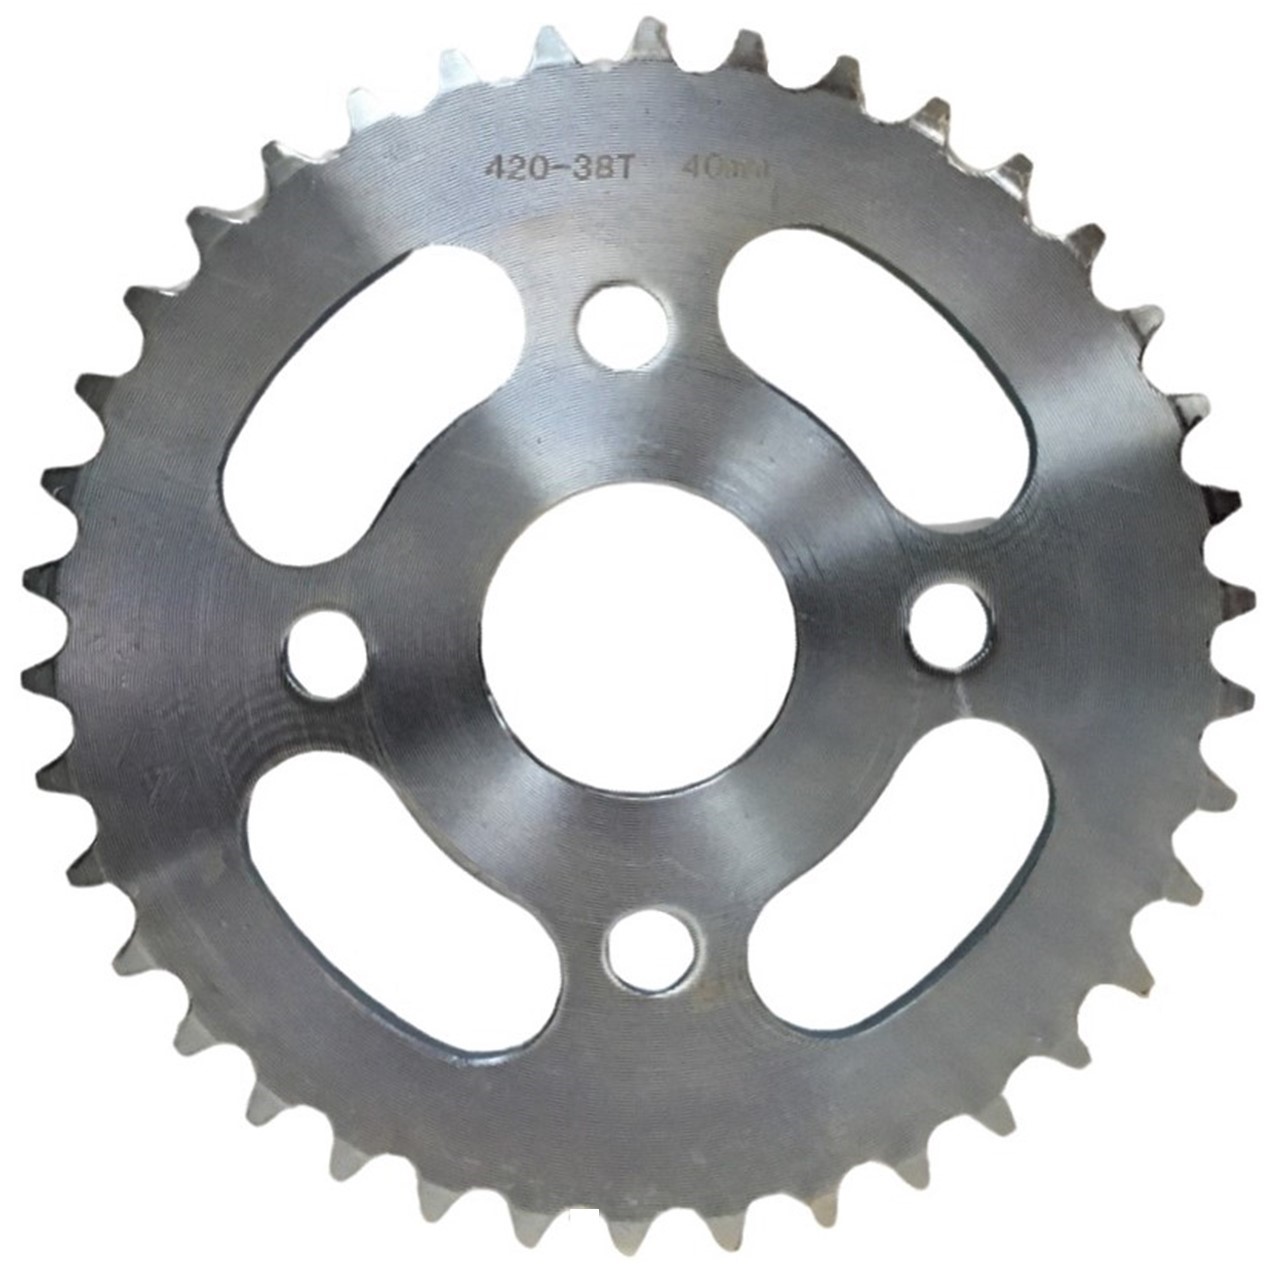 Rear Sprocket #420 38th Bolts Cross c/c=80 ID=40mm Fits Many Hammerhead, TrailMaster + Other ATVs, GoKarts, Minibikes - Click Image to Close